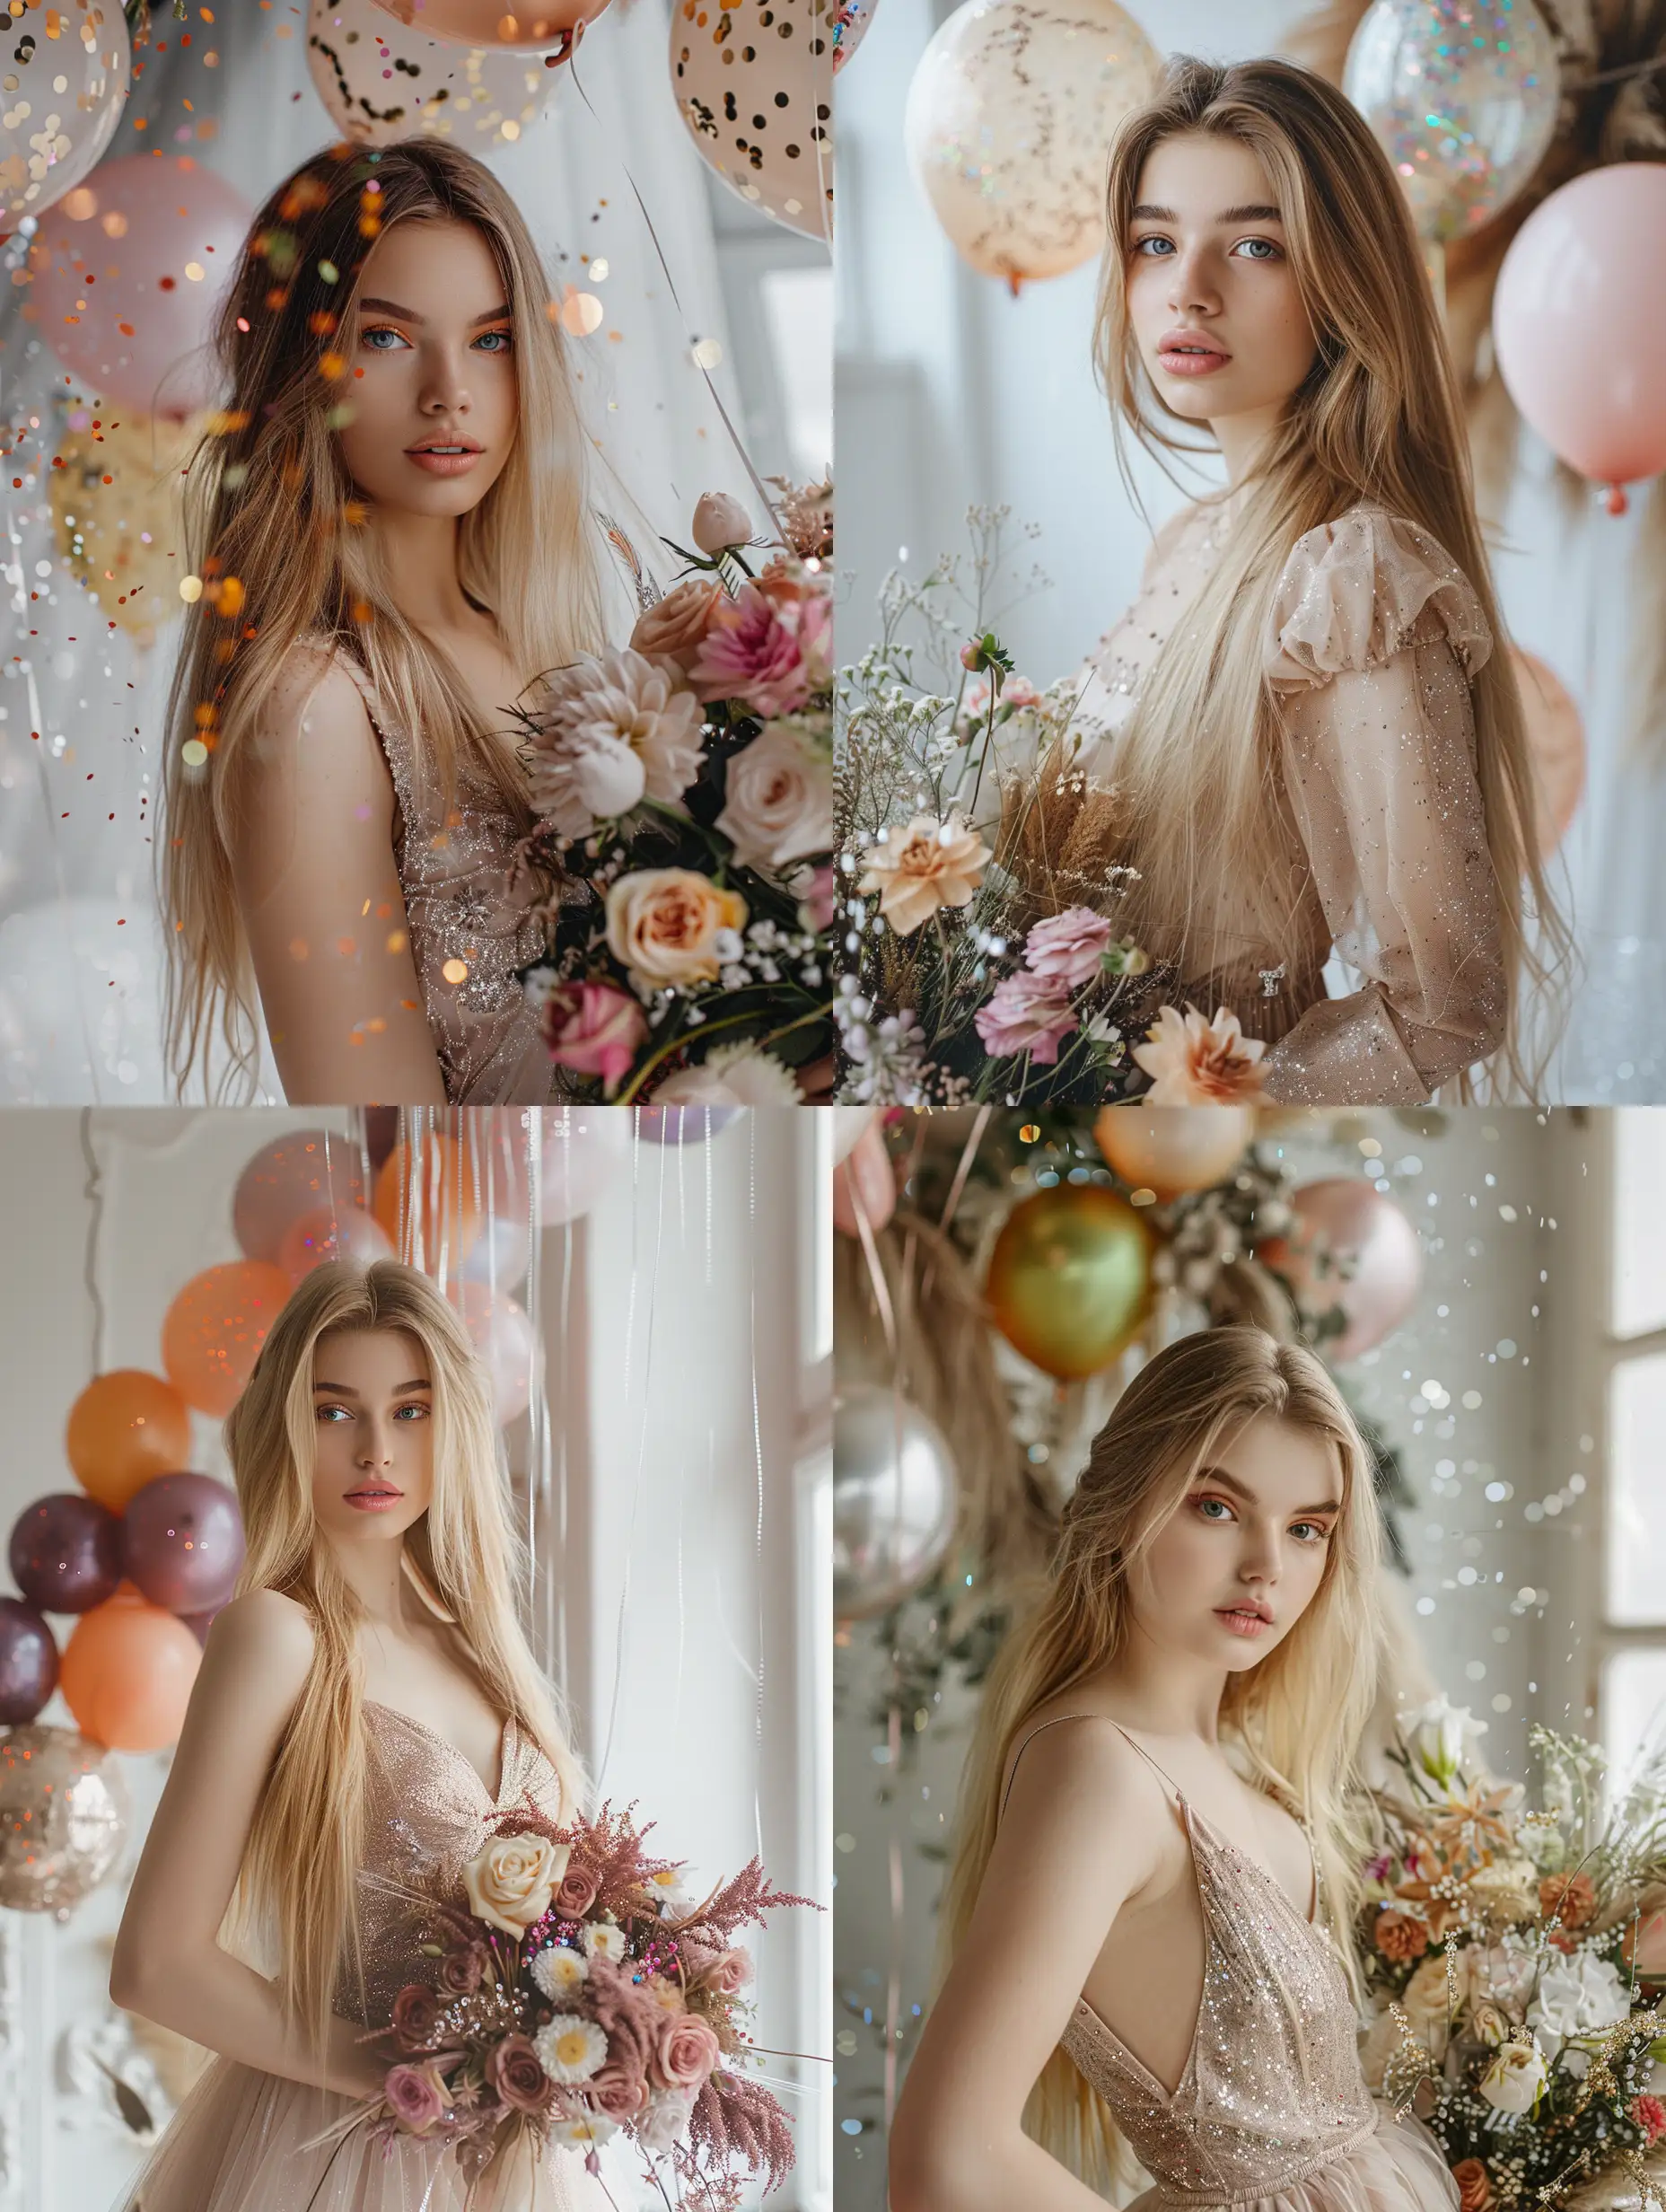 Young woman with blonde long hair in studio in a dress in a room with white walls in the hands of a lush bouquet of flowers. The room is decorated with glitter and balloons made of falsa realistic photo photo shoot girl looking at the camera face well seen detailing 